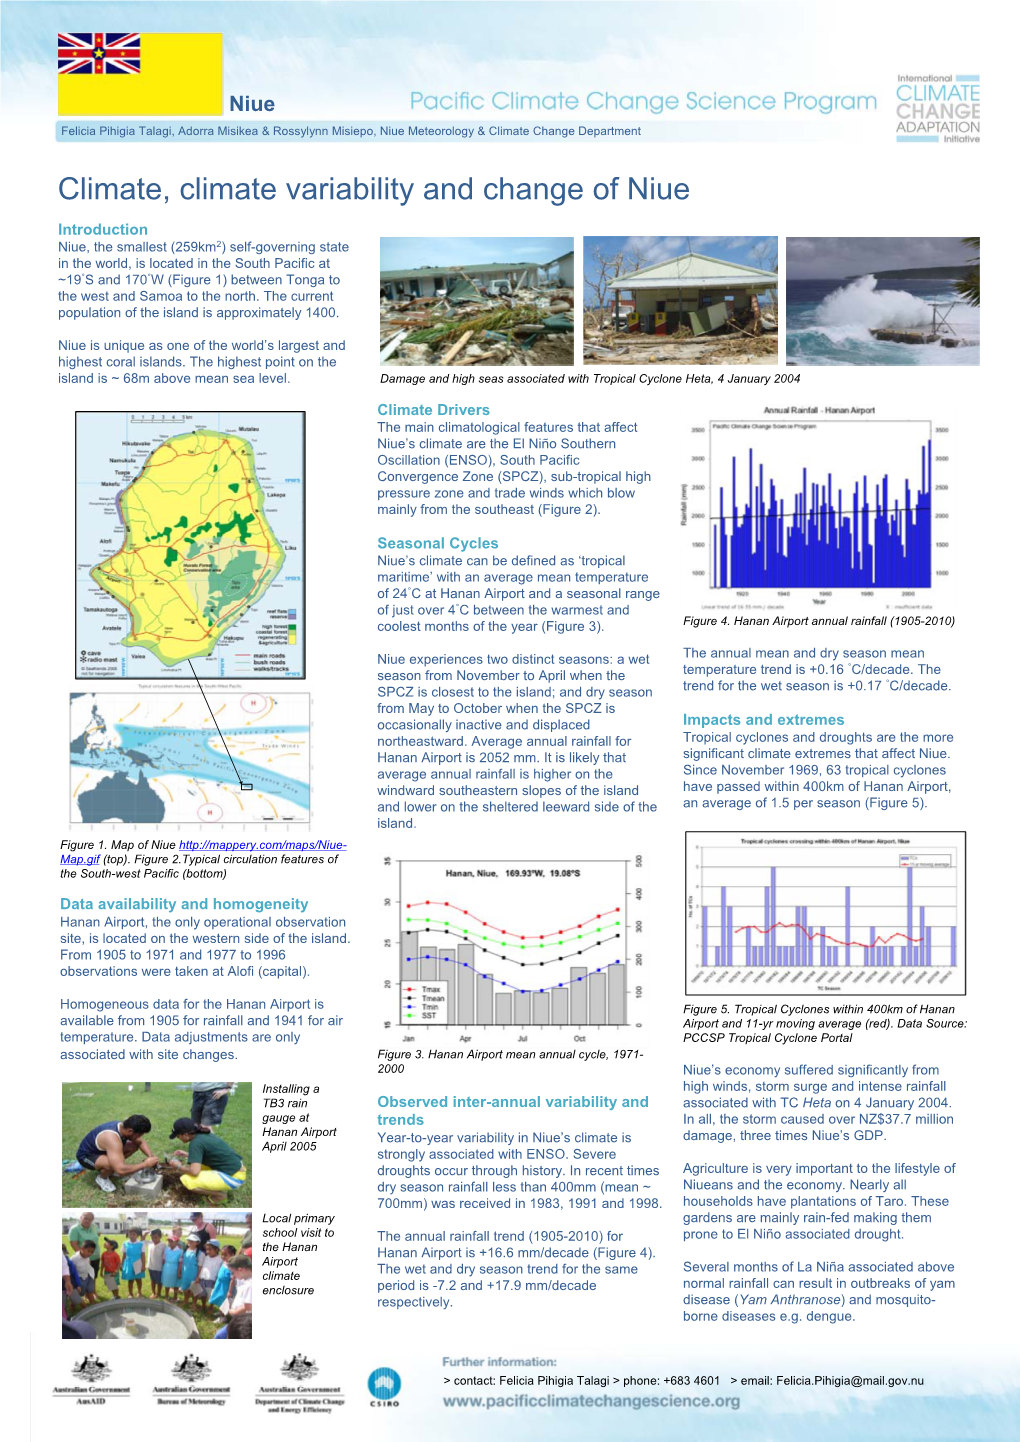 Climate, Climate Variability and Change of Niue